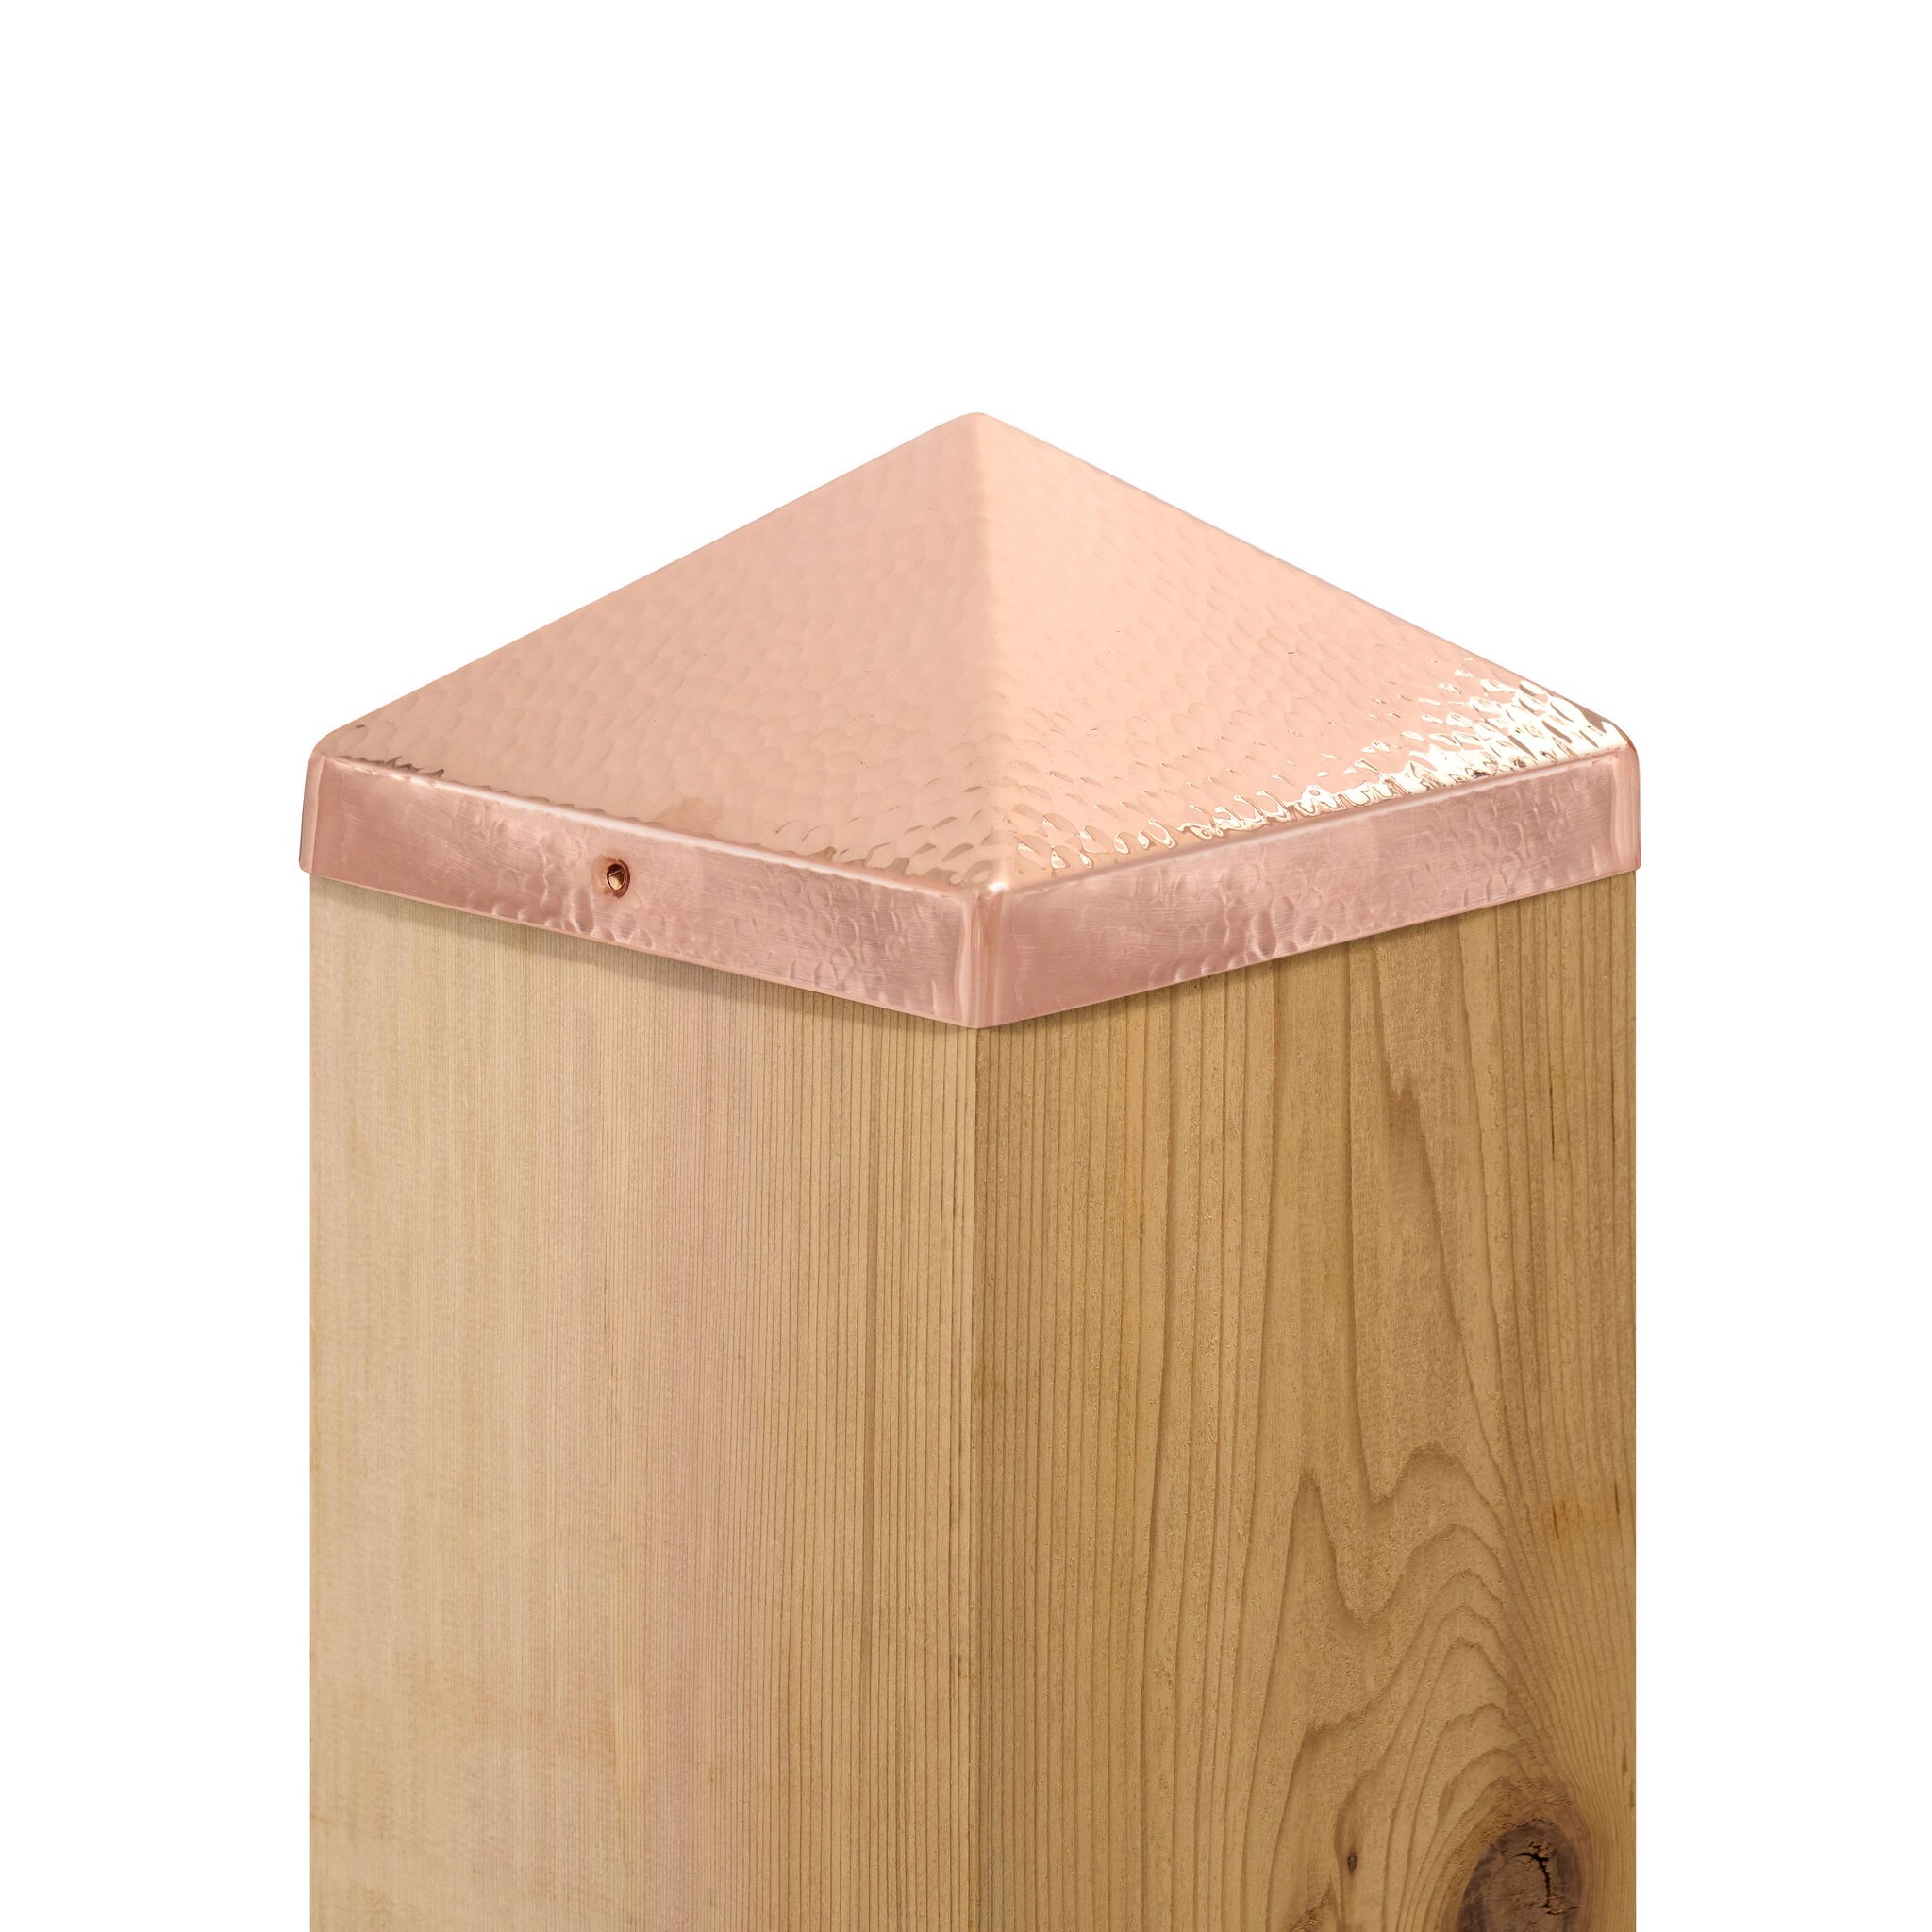 Solid Copper Pyramid - 2.5 inches -Brushed Finish